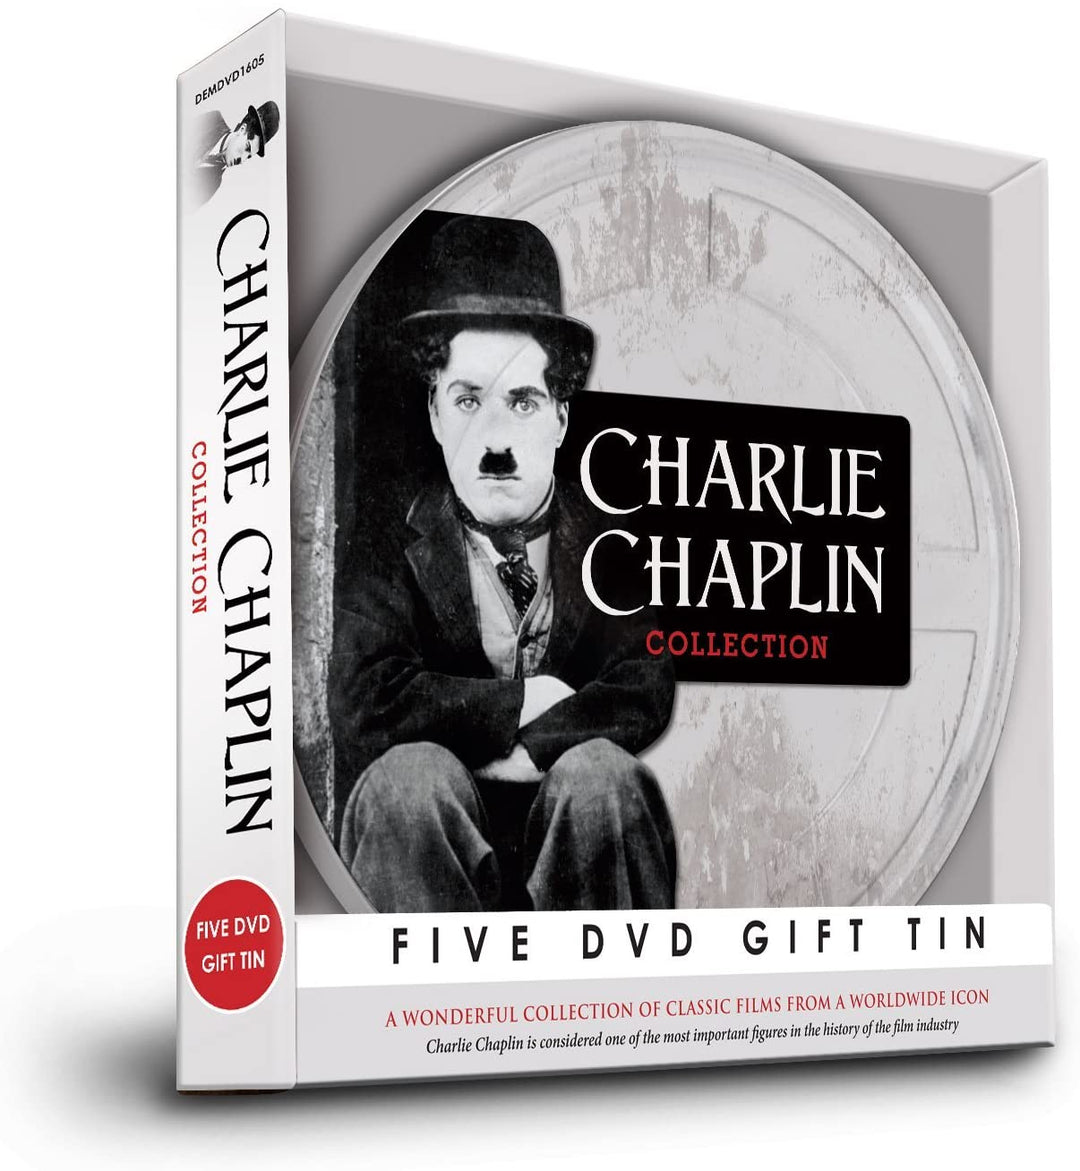 Charlie Chaplin Film Reel Collection GIFT TIN] - Comedy [DVD]